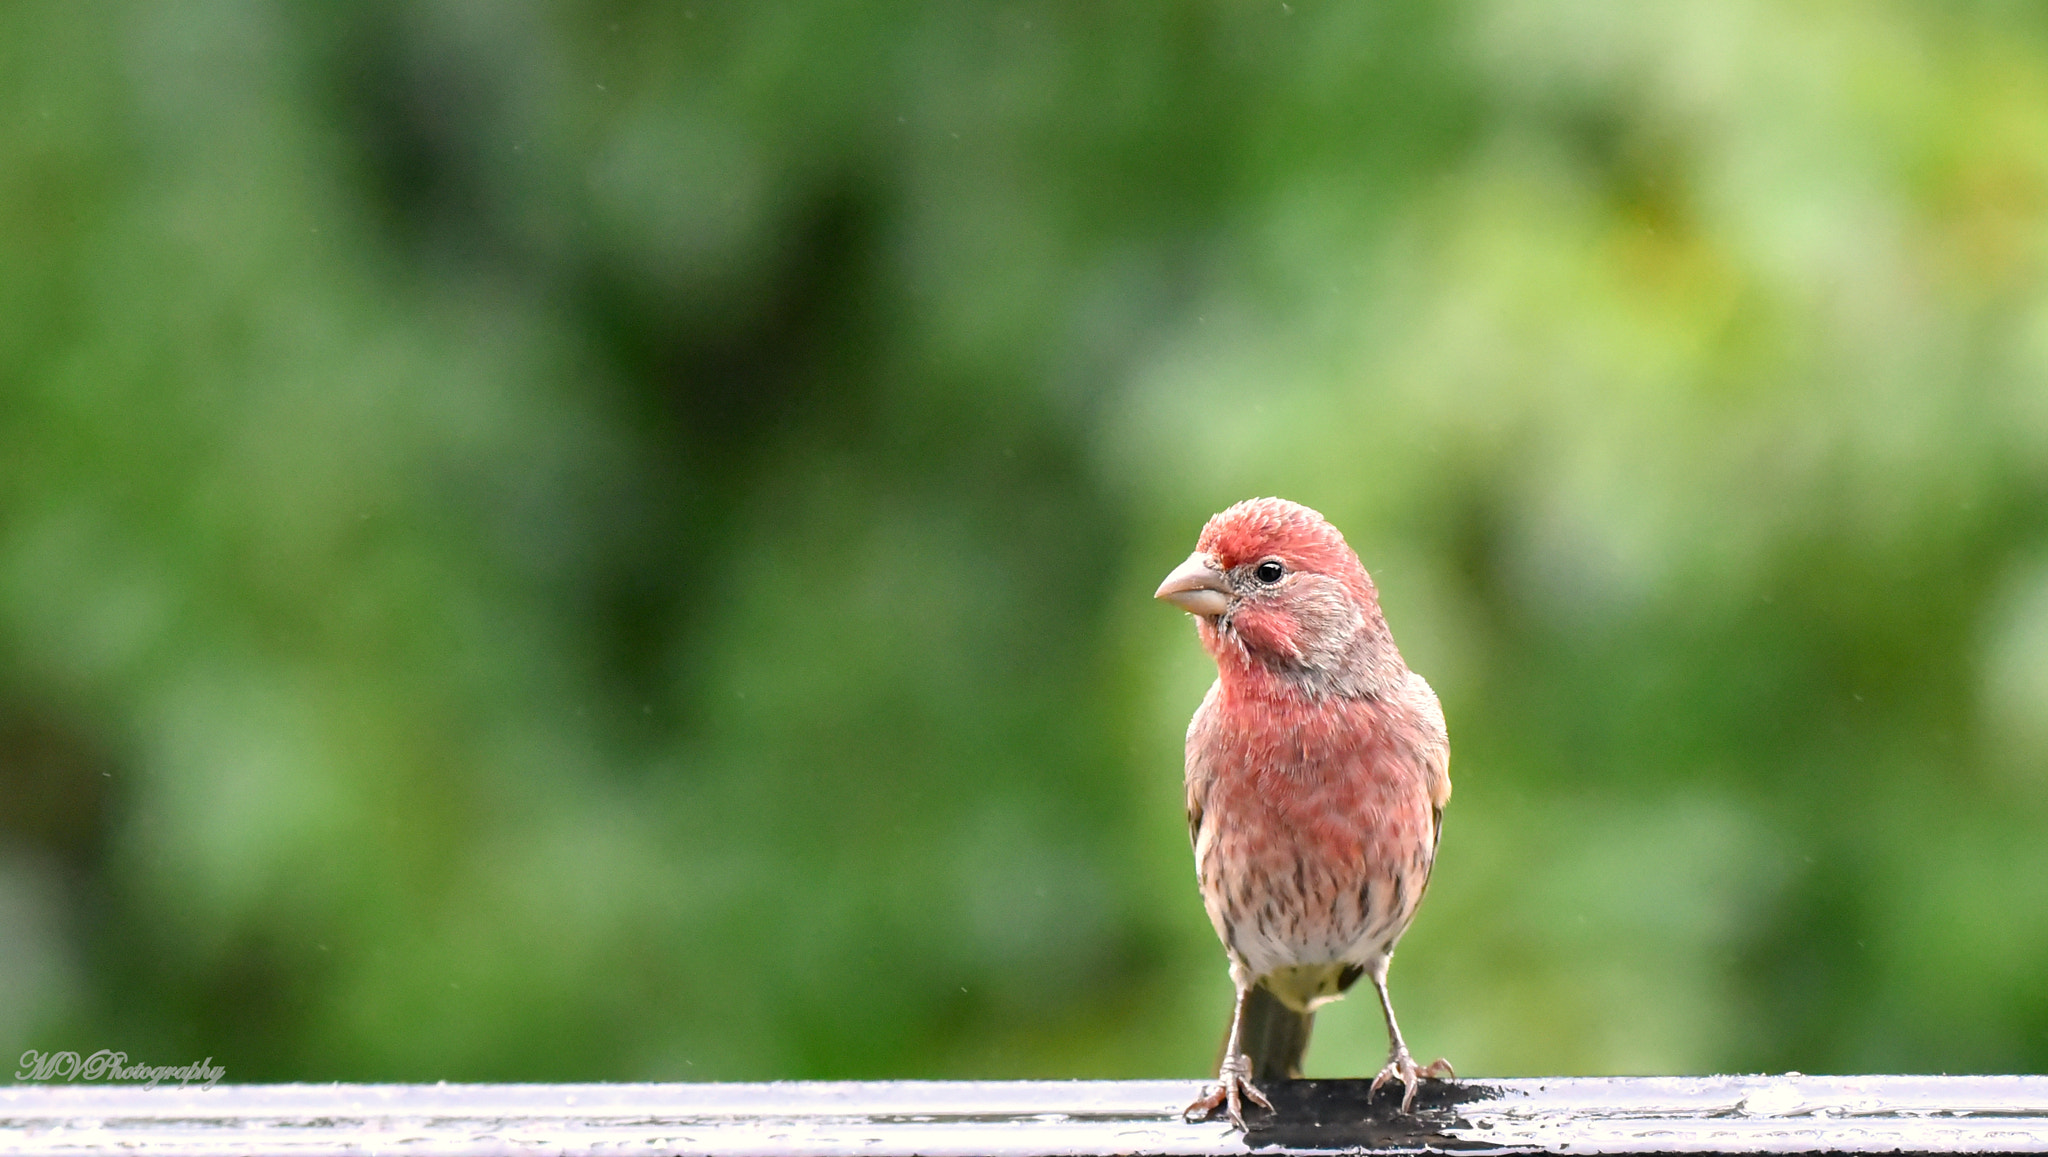 Nikon D750 + Sigma 150-600mm F5-6.3 DG OS HSM | C sample photo. Red finch photography